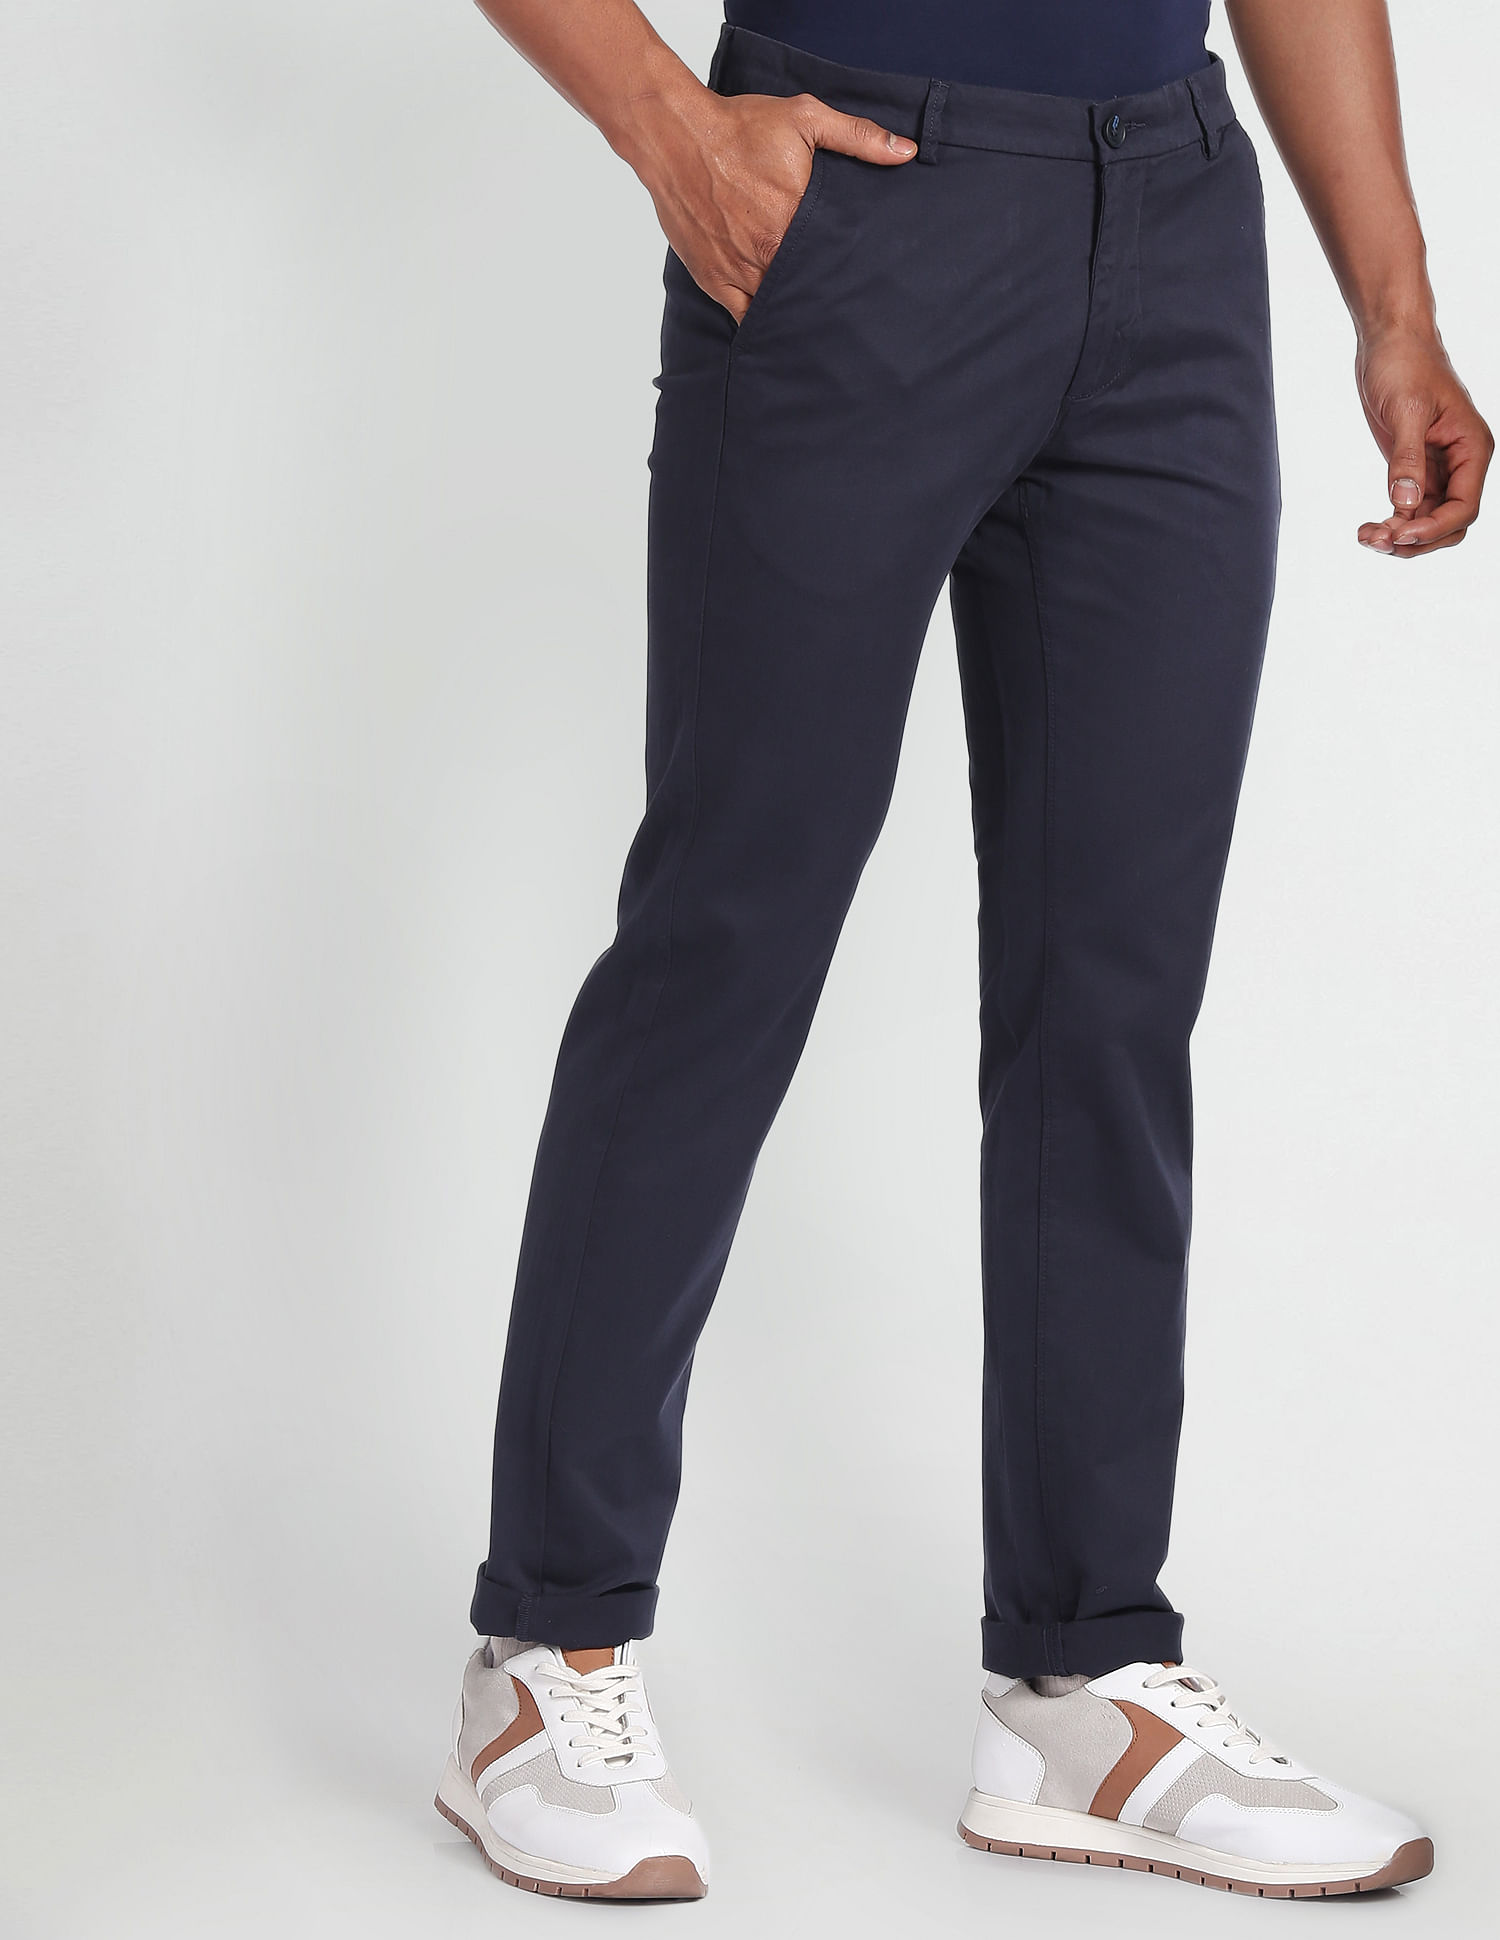 Arrow Sports Olive Trousers - Buy Arrow Sports Olive Trousers online in  India